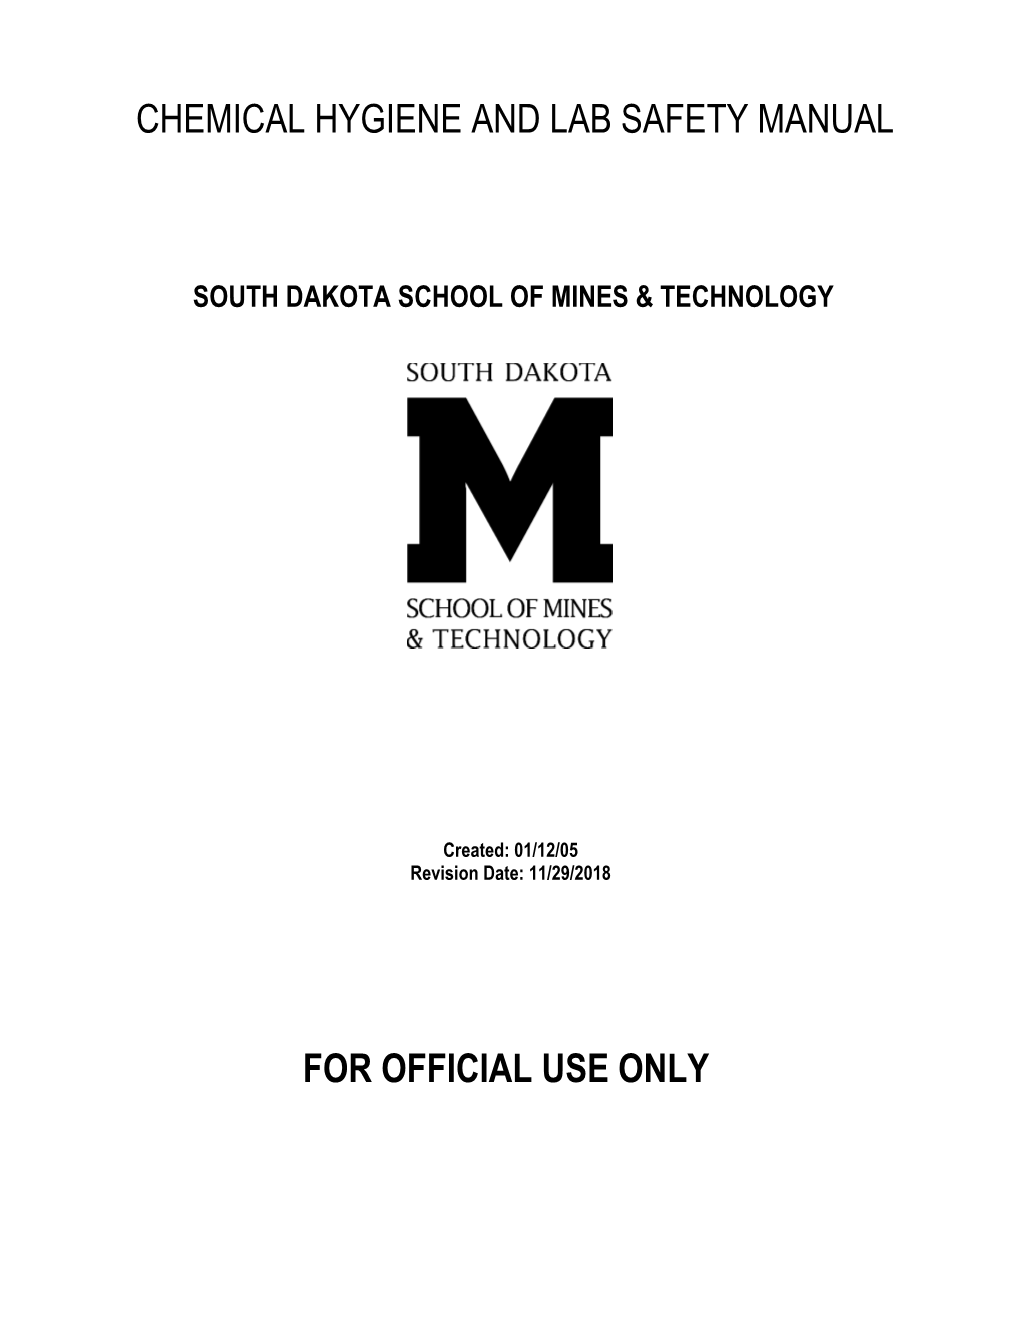 Chemical Hygiene and Lab Safety Manual